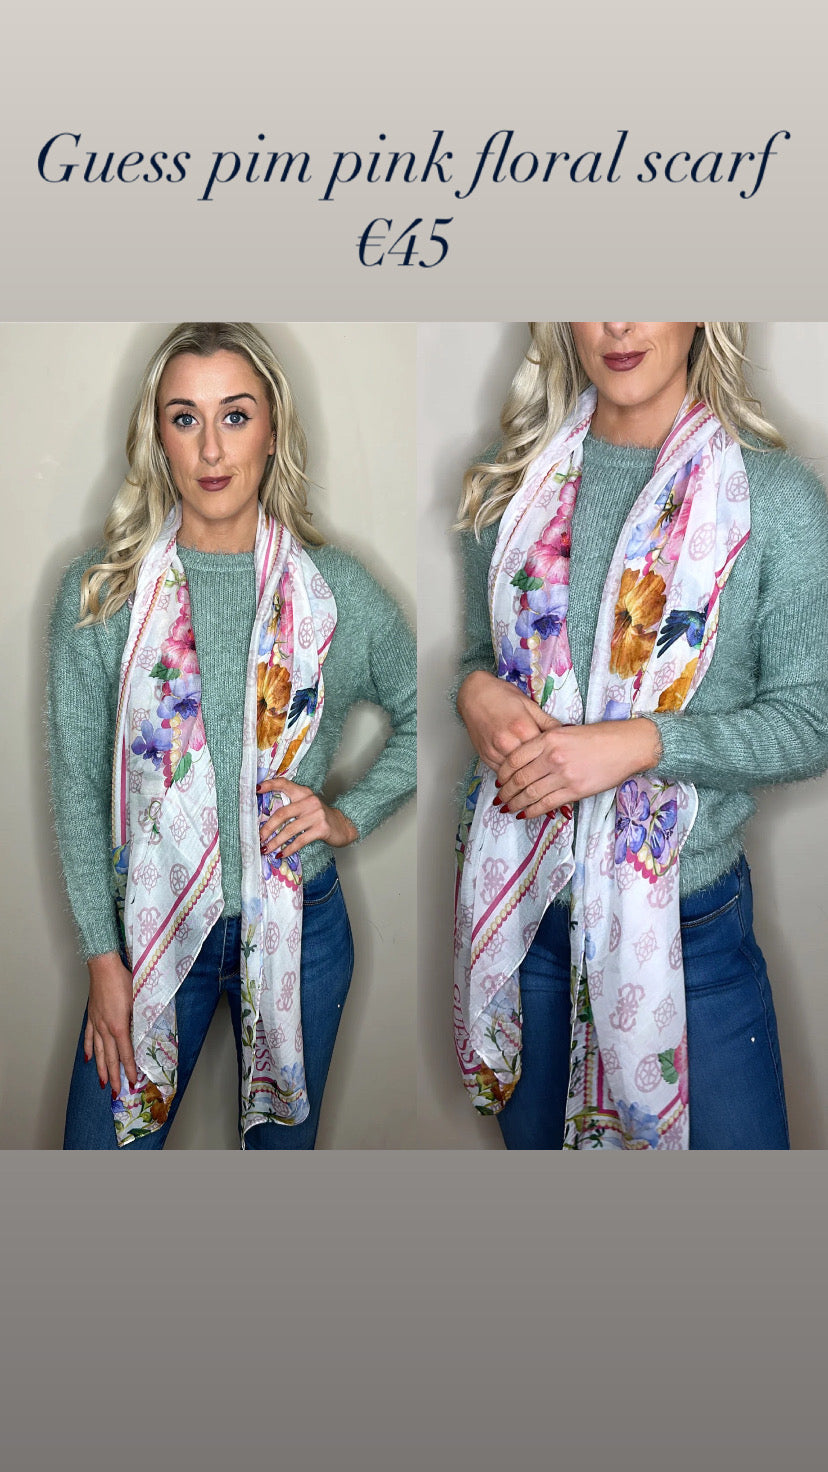 Aw9991 Guess pim pink floral scarf